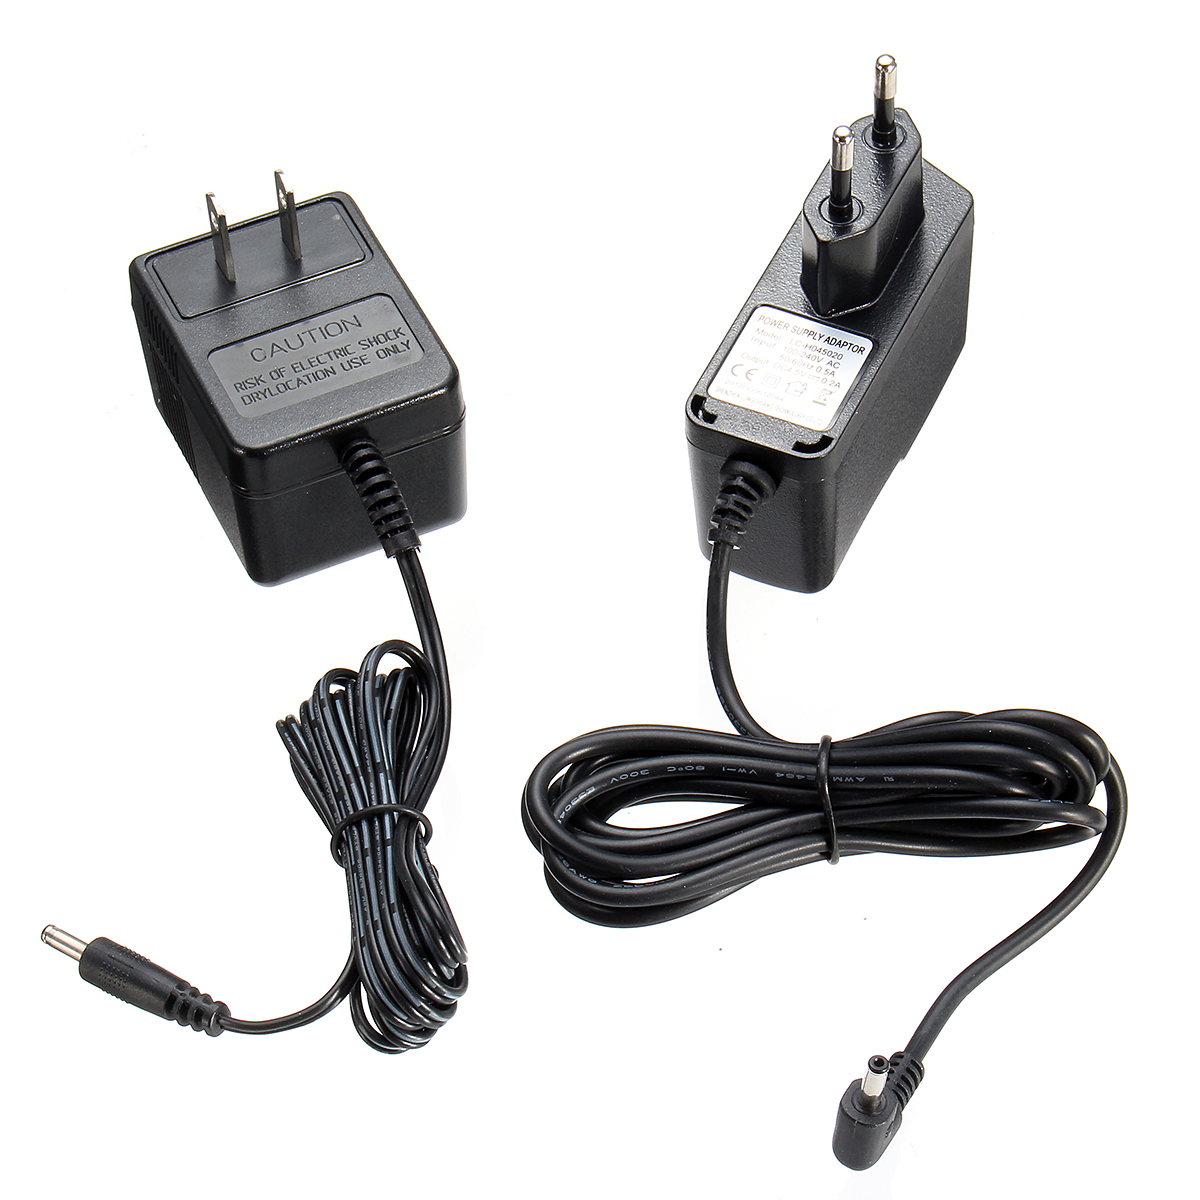 AC-100-V-240V-DC-45V-02-Adapter-USEU-Plug-Power-Supply-Charger-For-Wireless-Weather-Station-Clock-1389379-1